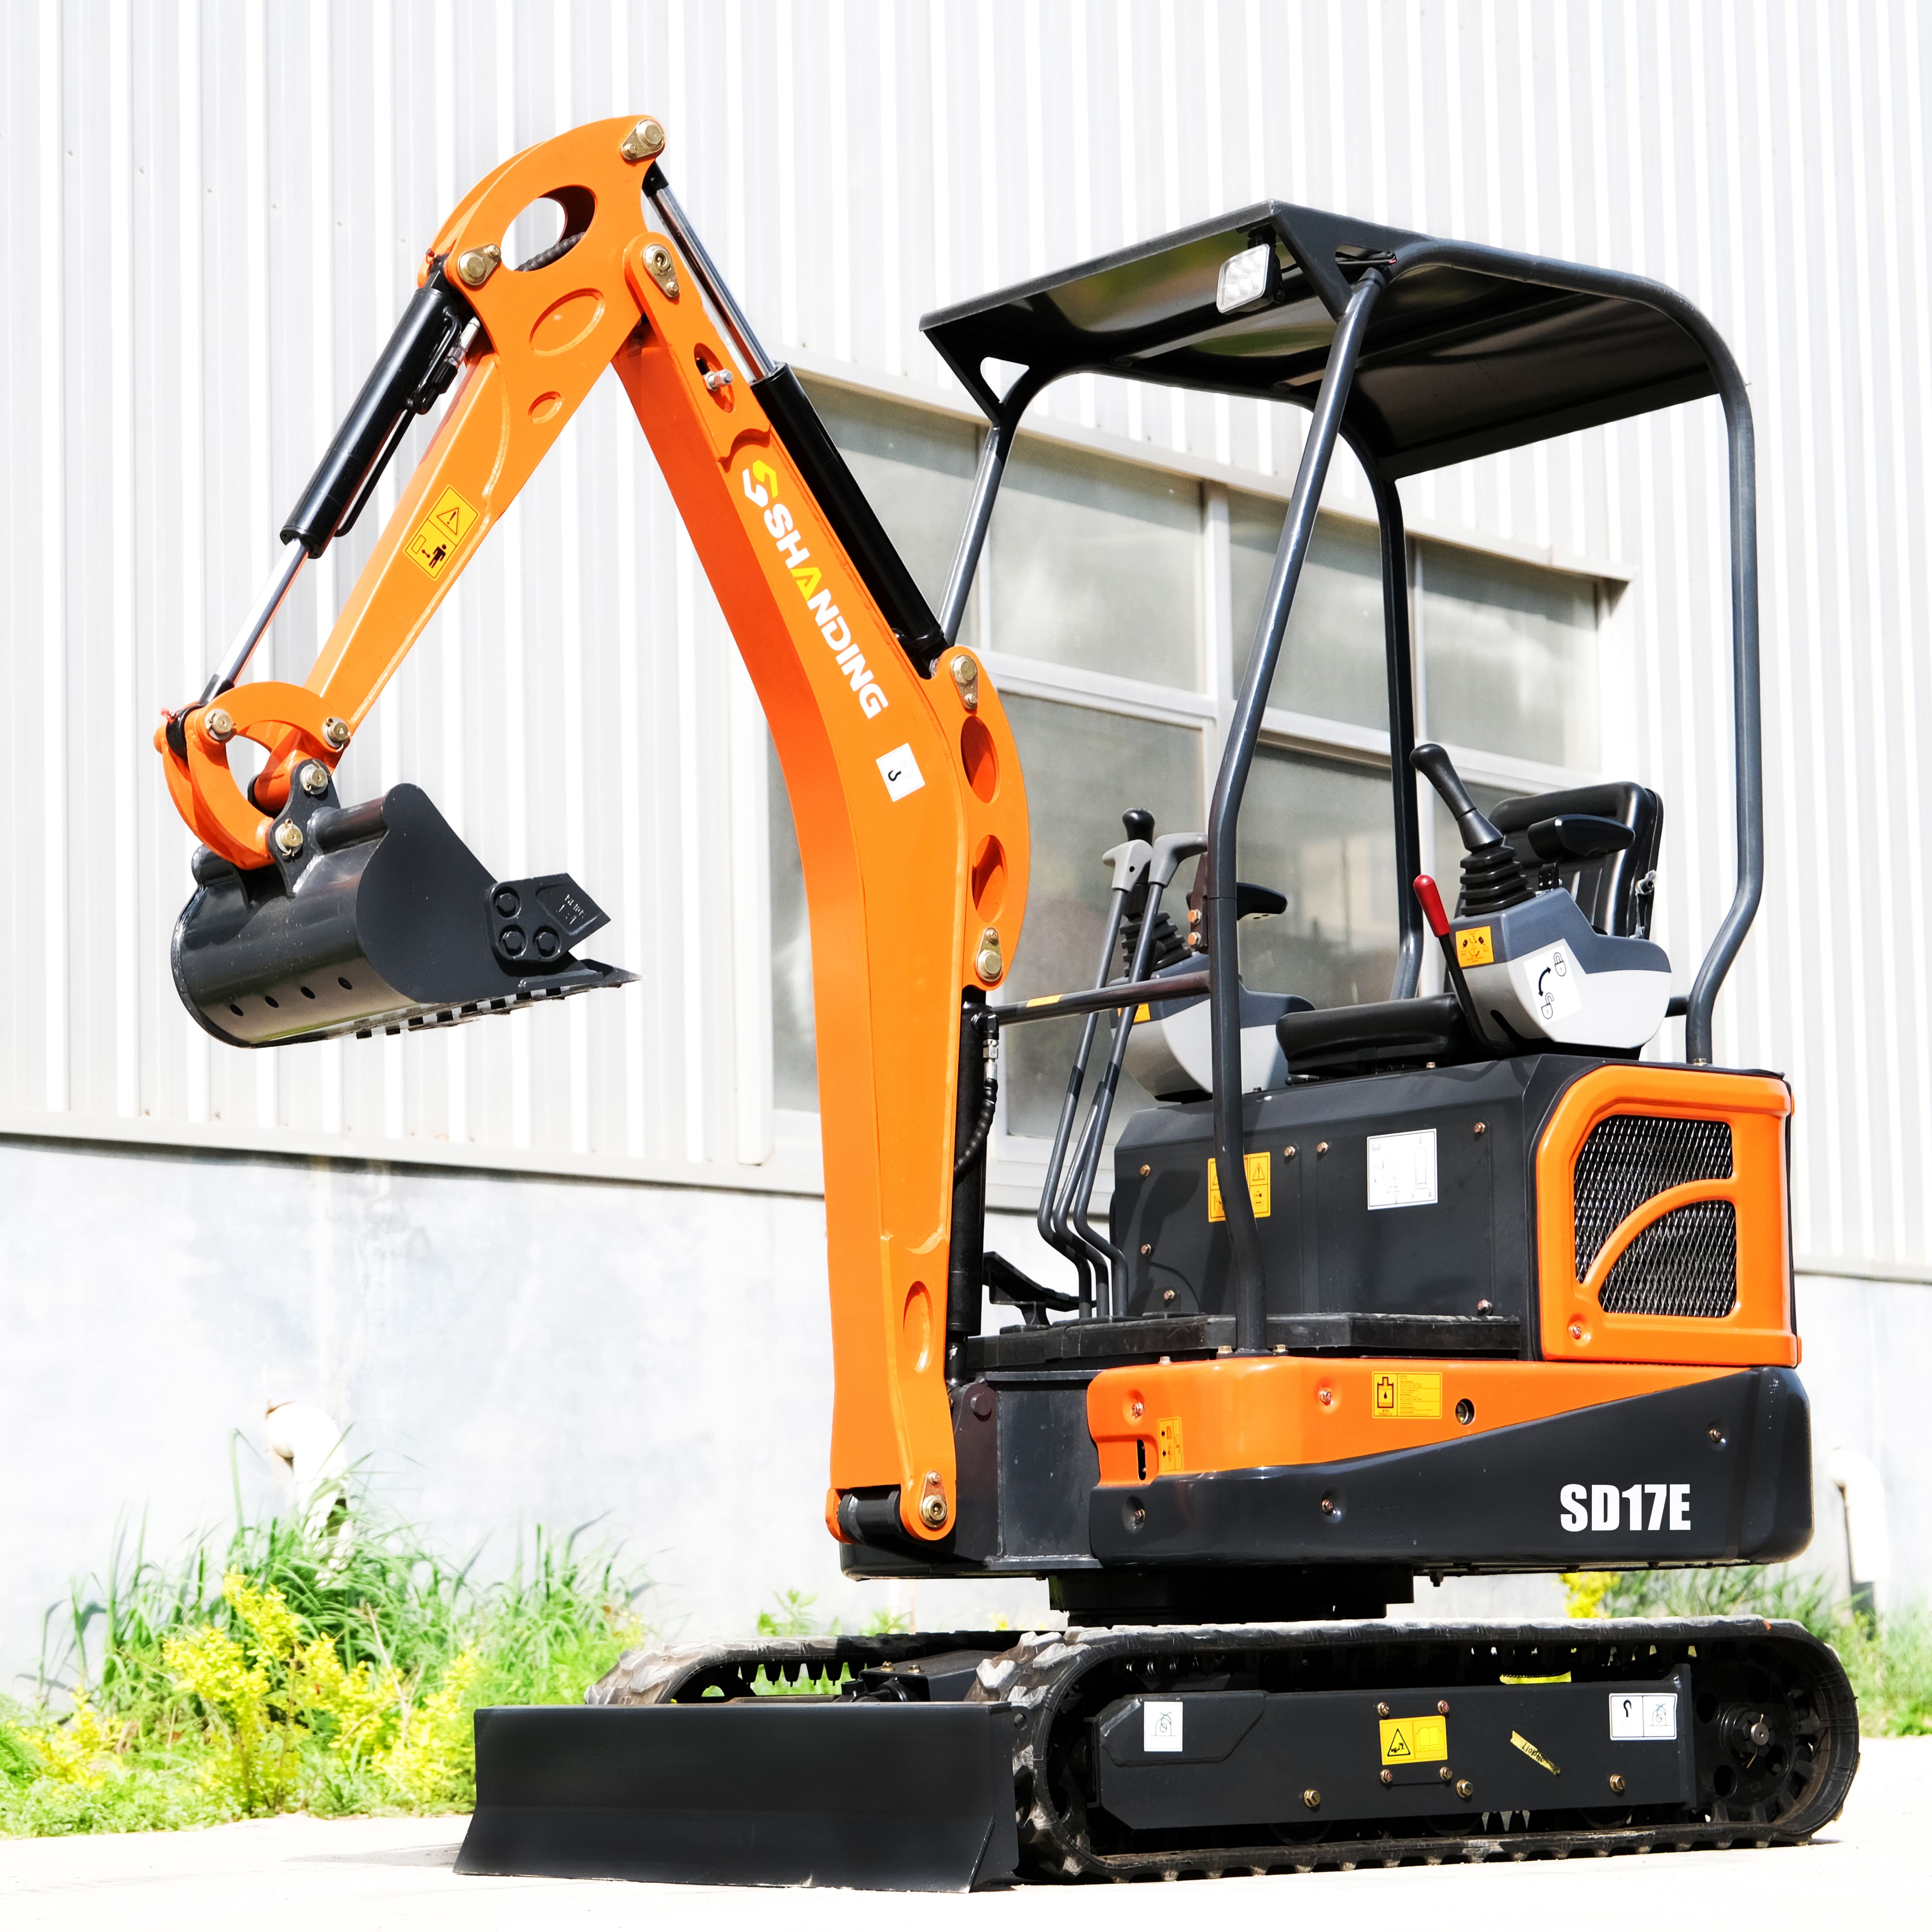 High-efficiency small excavator SD17E, greatly improving operational efficiency